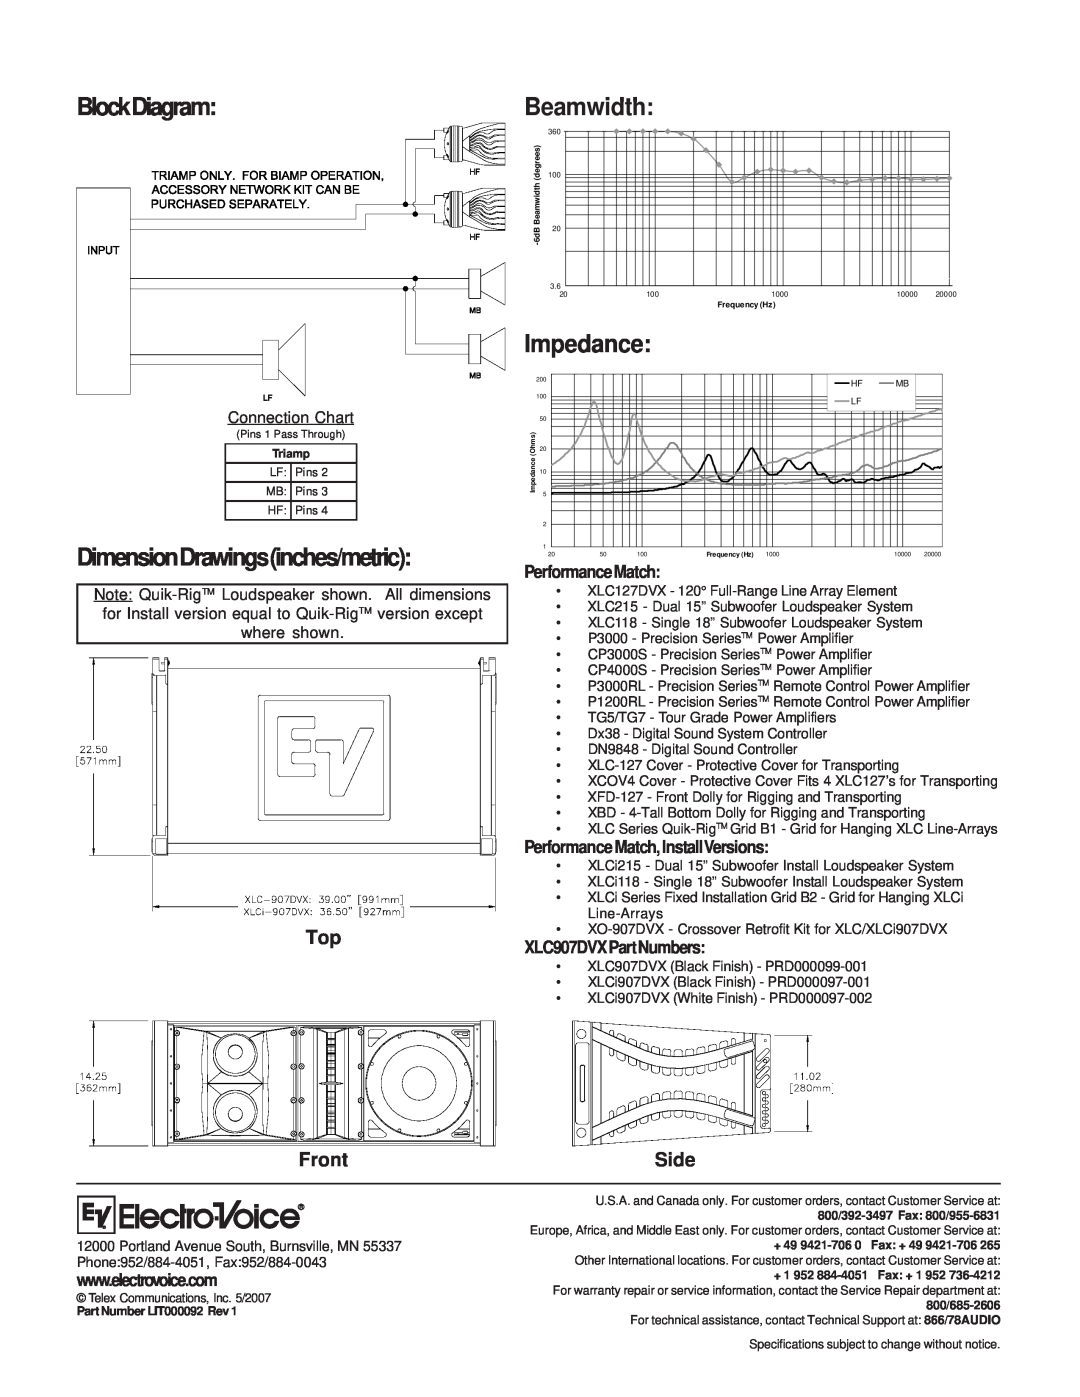 Electro-Voice XLC215 BlockDiagram, Beamwidth, Impedance, Front, DimensionDrawingsinches/metric, Side, Performance Match 